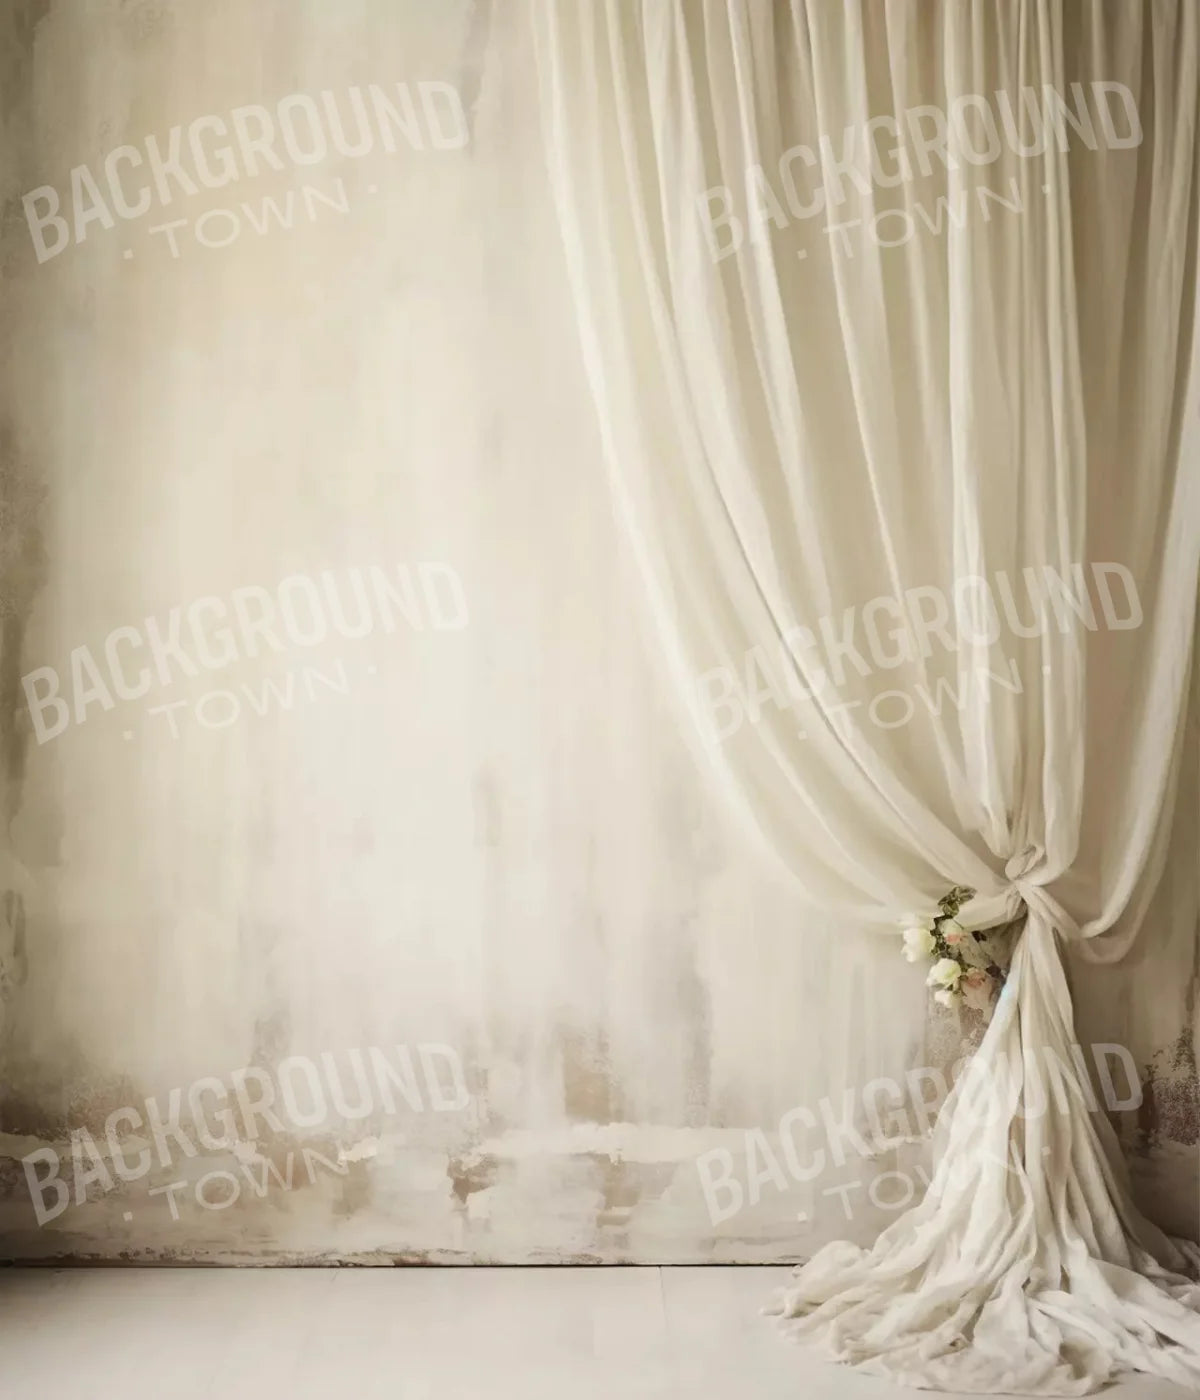 Plaster Wall With Curtain Ii 10X12 Ultracloth ( 120 X 144 Inch ) Backdrop